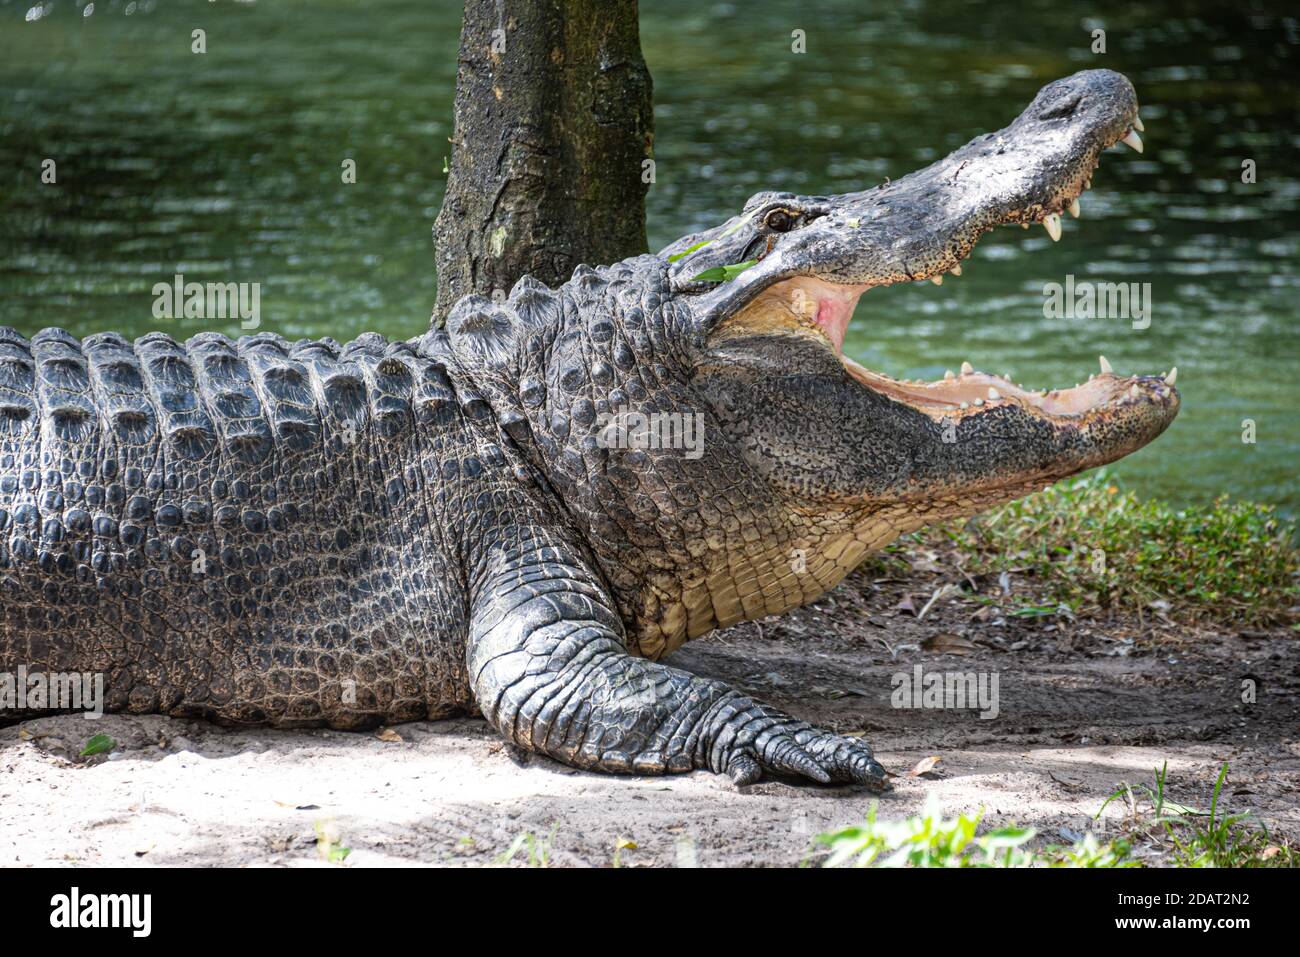 Large alligator (Alligator mississippiensis) sunning with mouth open at Busch Gardens Tampa Bay in Tampa, Florida. (USA) Stock Photo